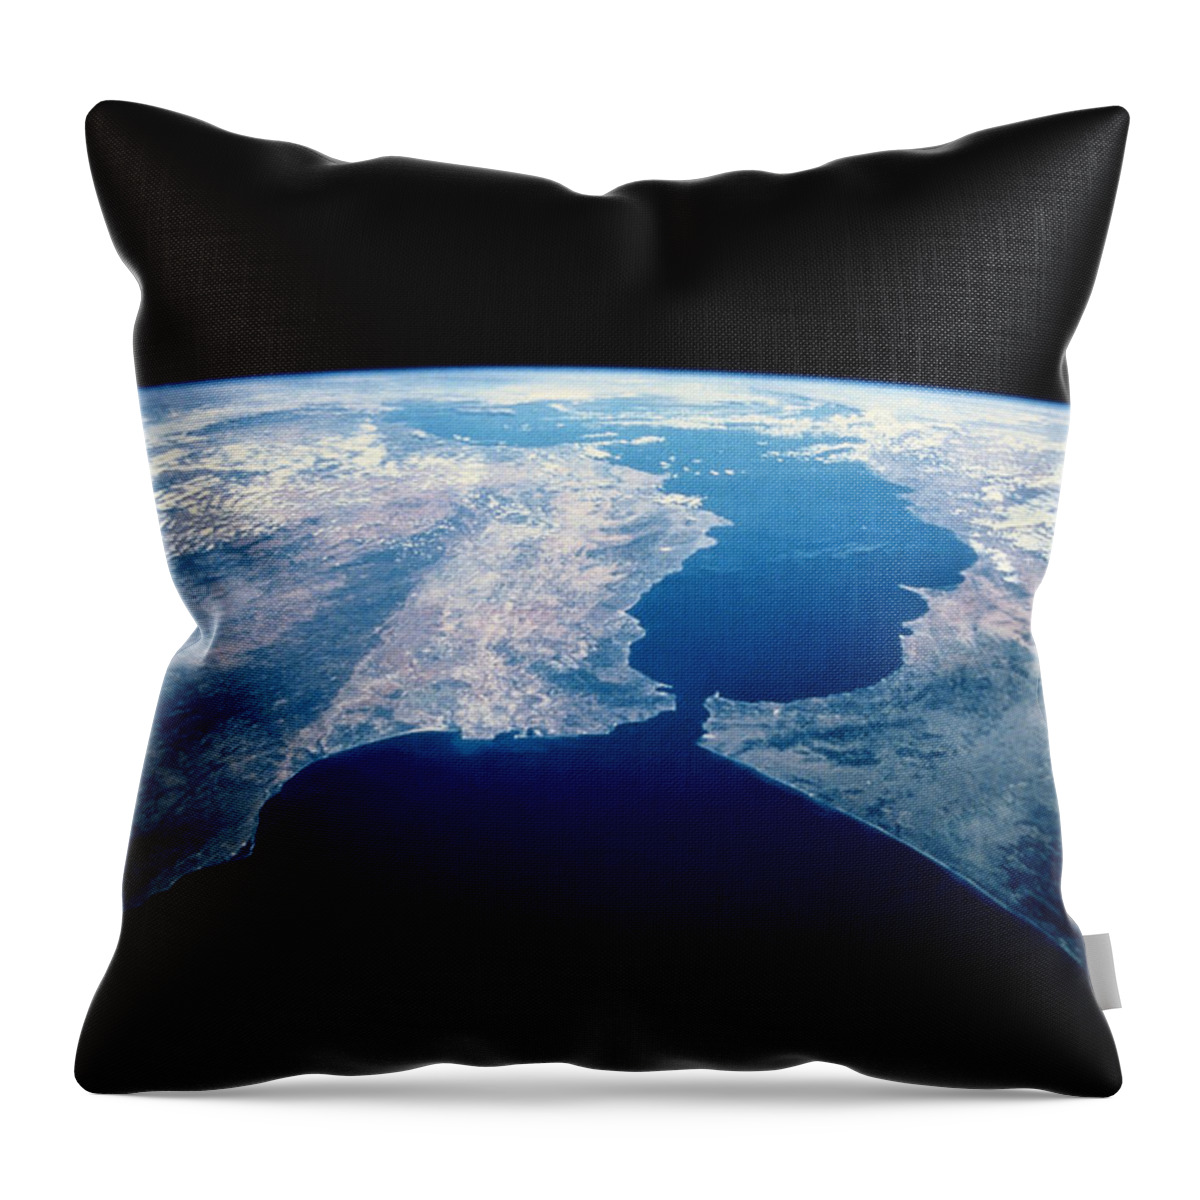 Black Background Throw Pillow featuring the photograph Strait Of Gibraltar by Internetwork Media